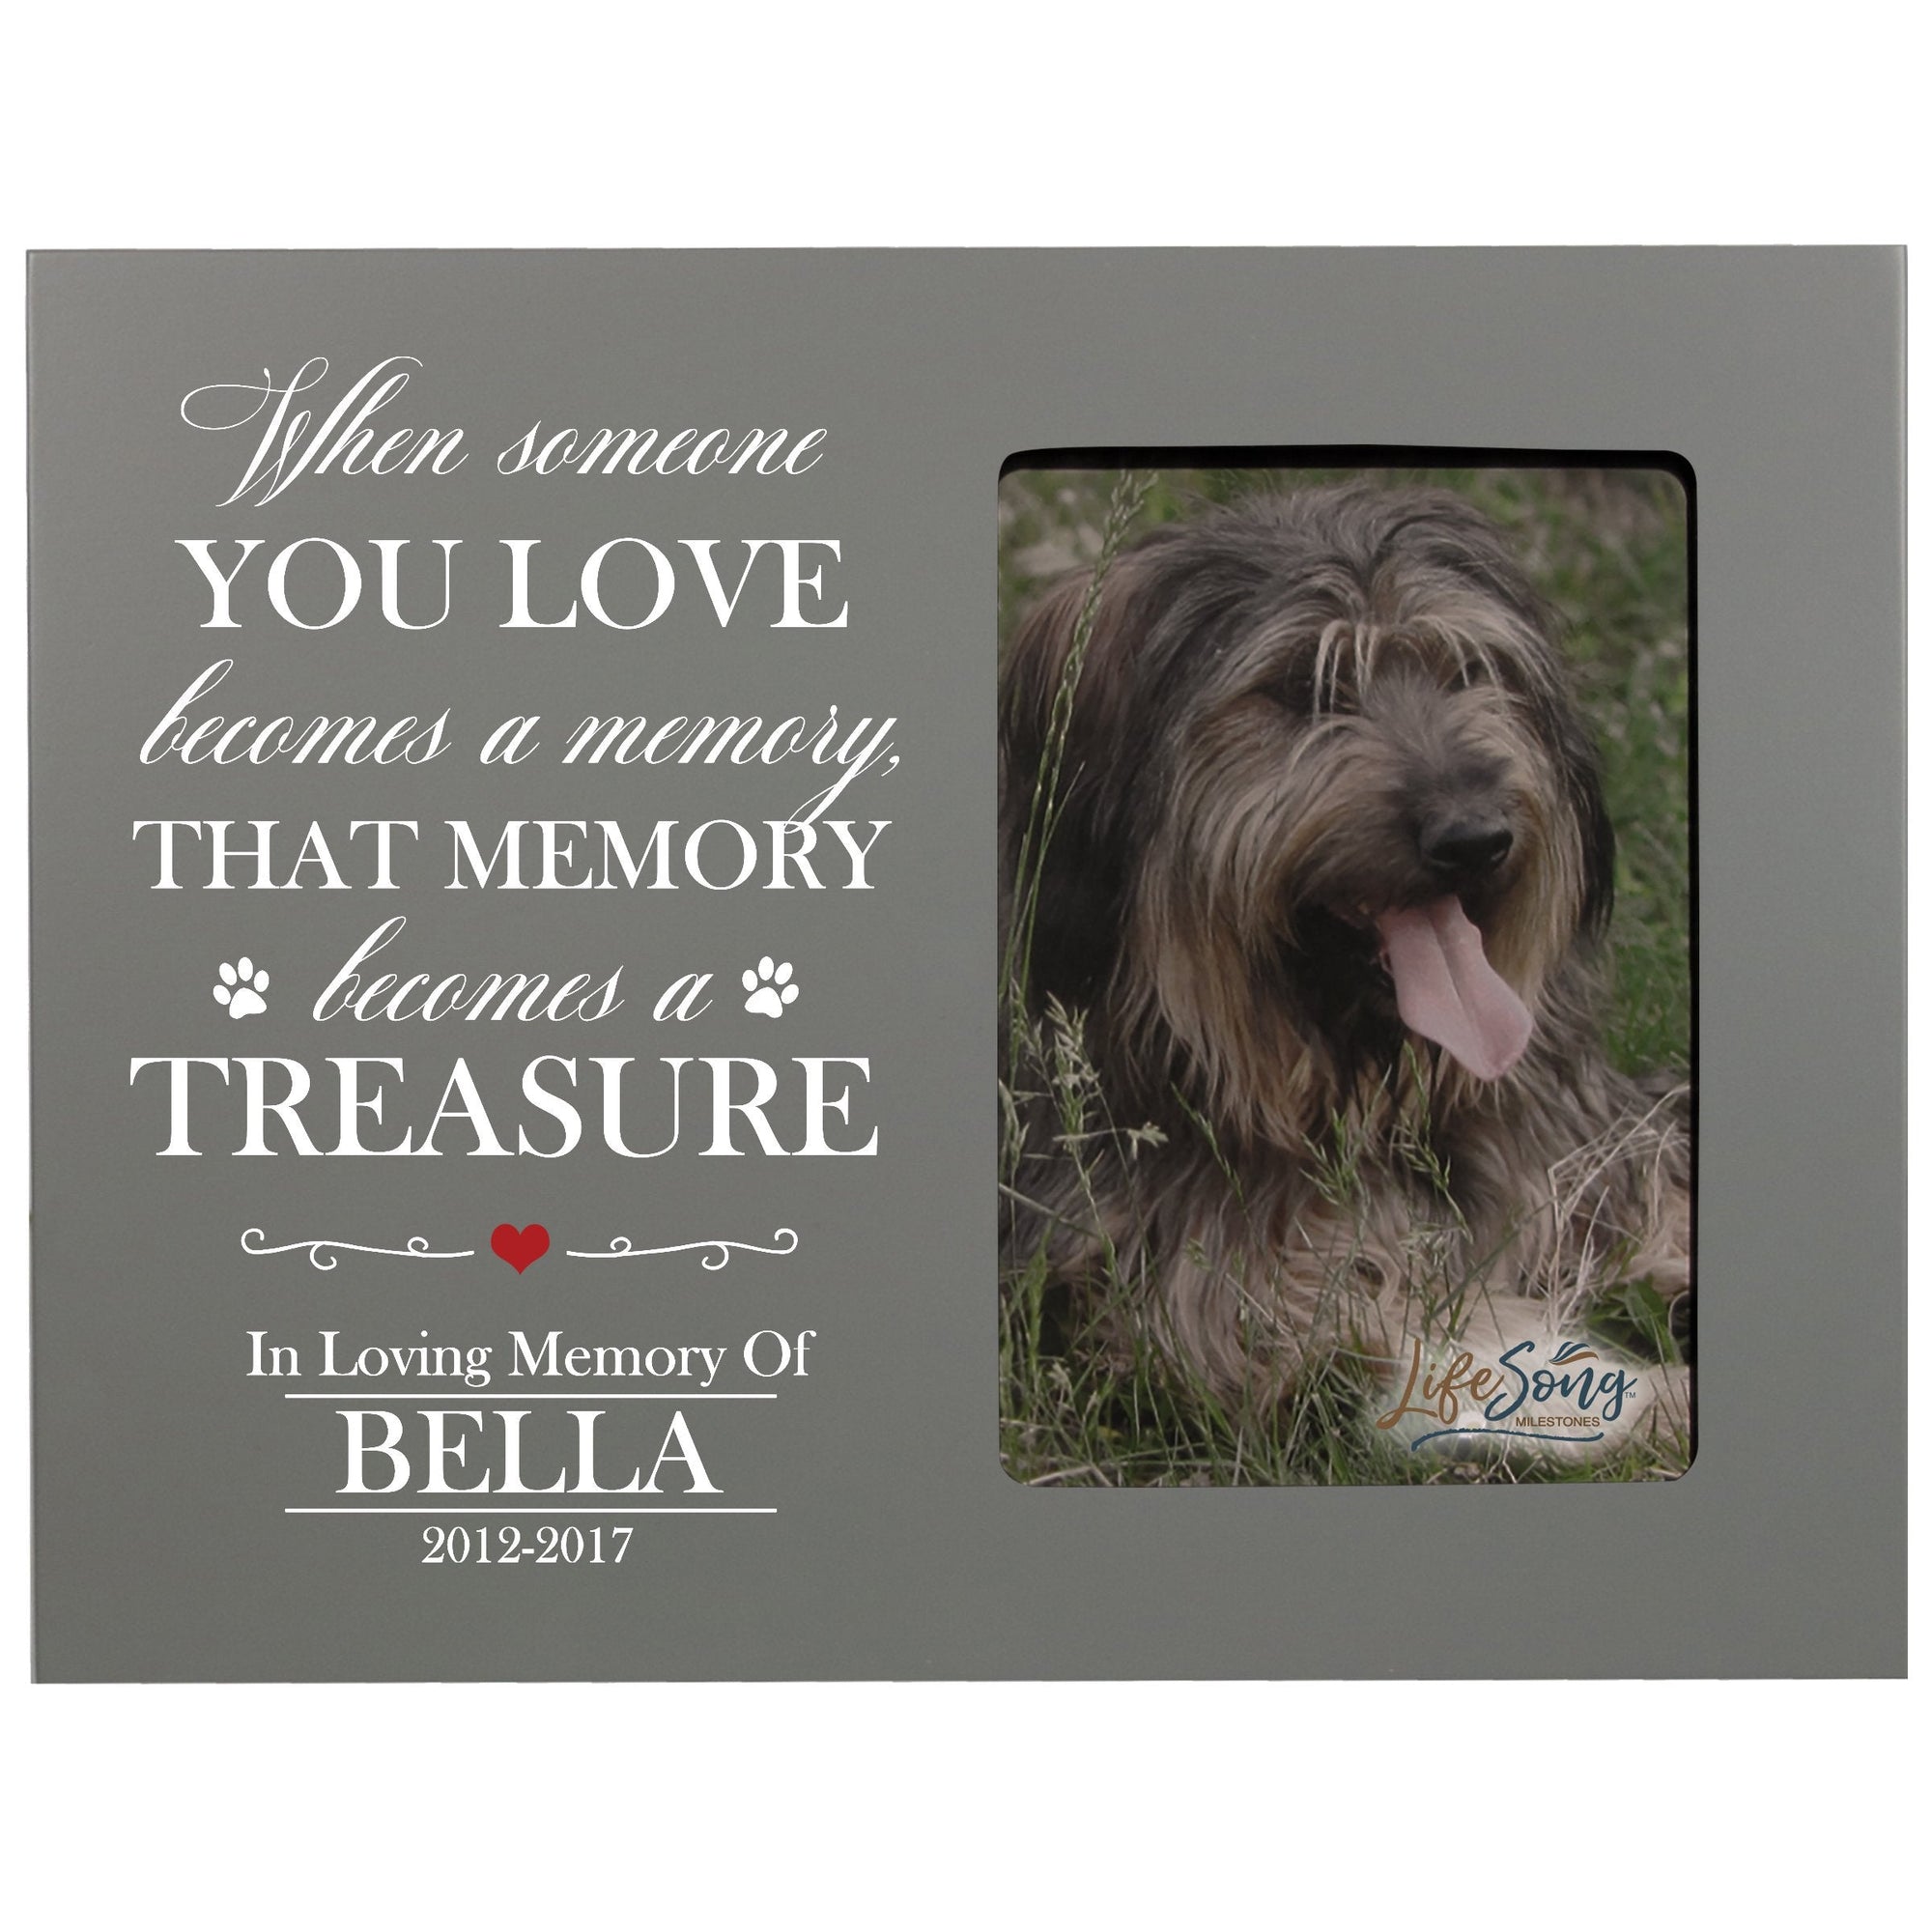 8x10 Grey Pet Memorial Picture Frame with the phrase "When Someone You Love Becomes A Memory"